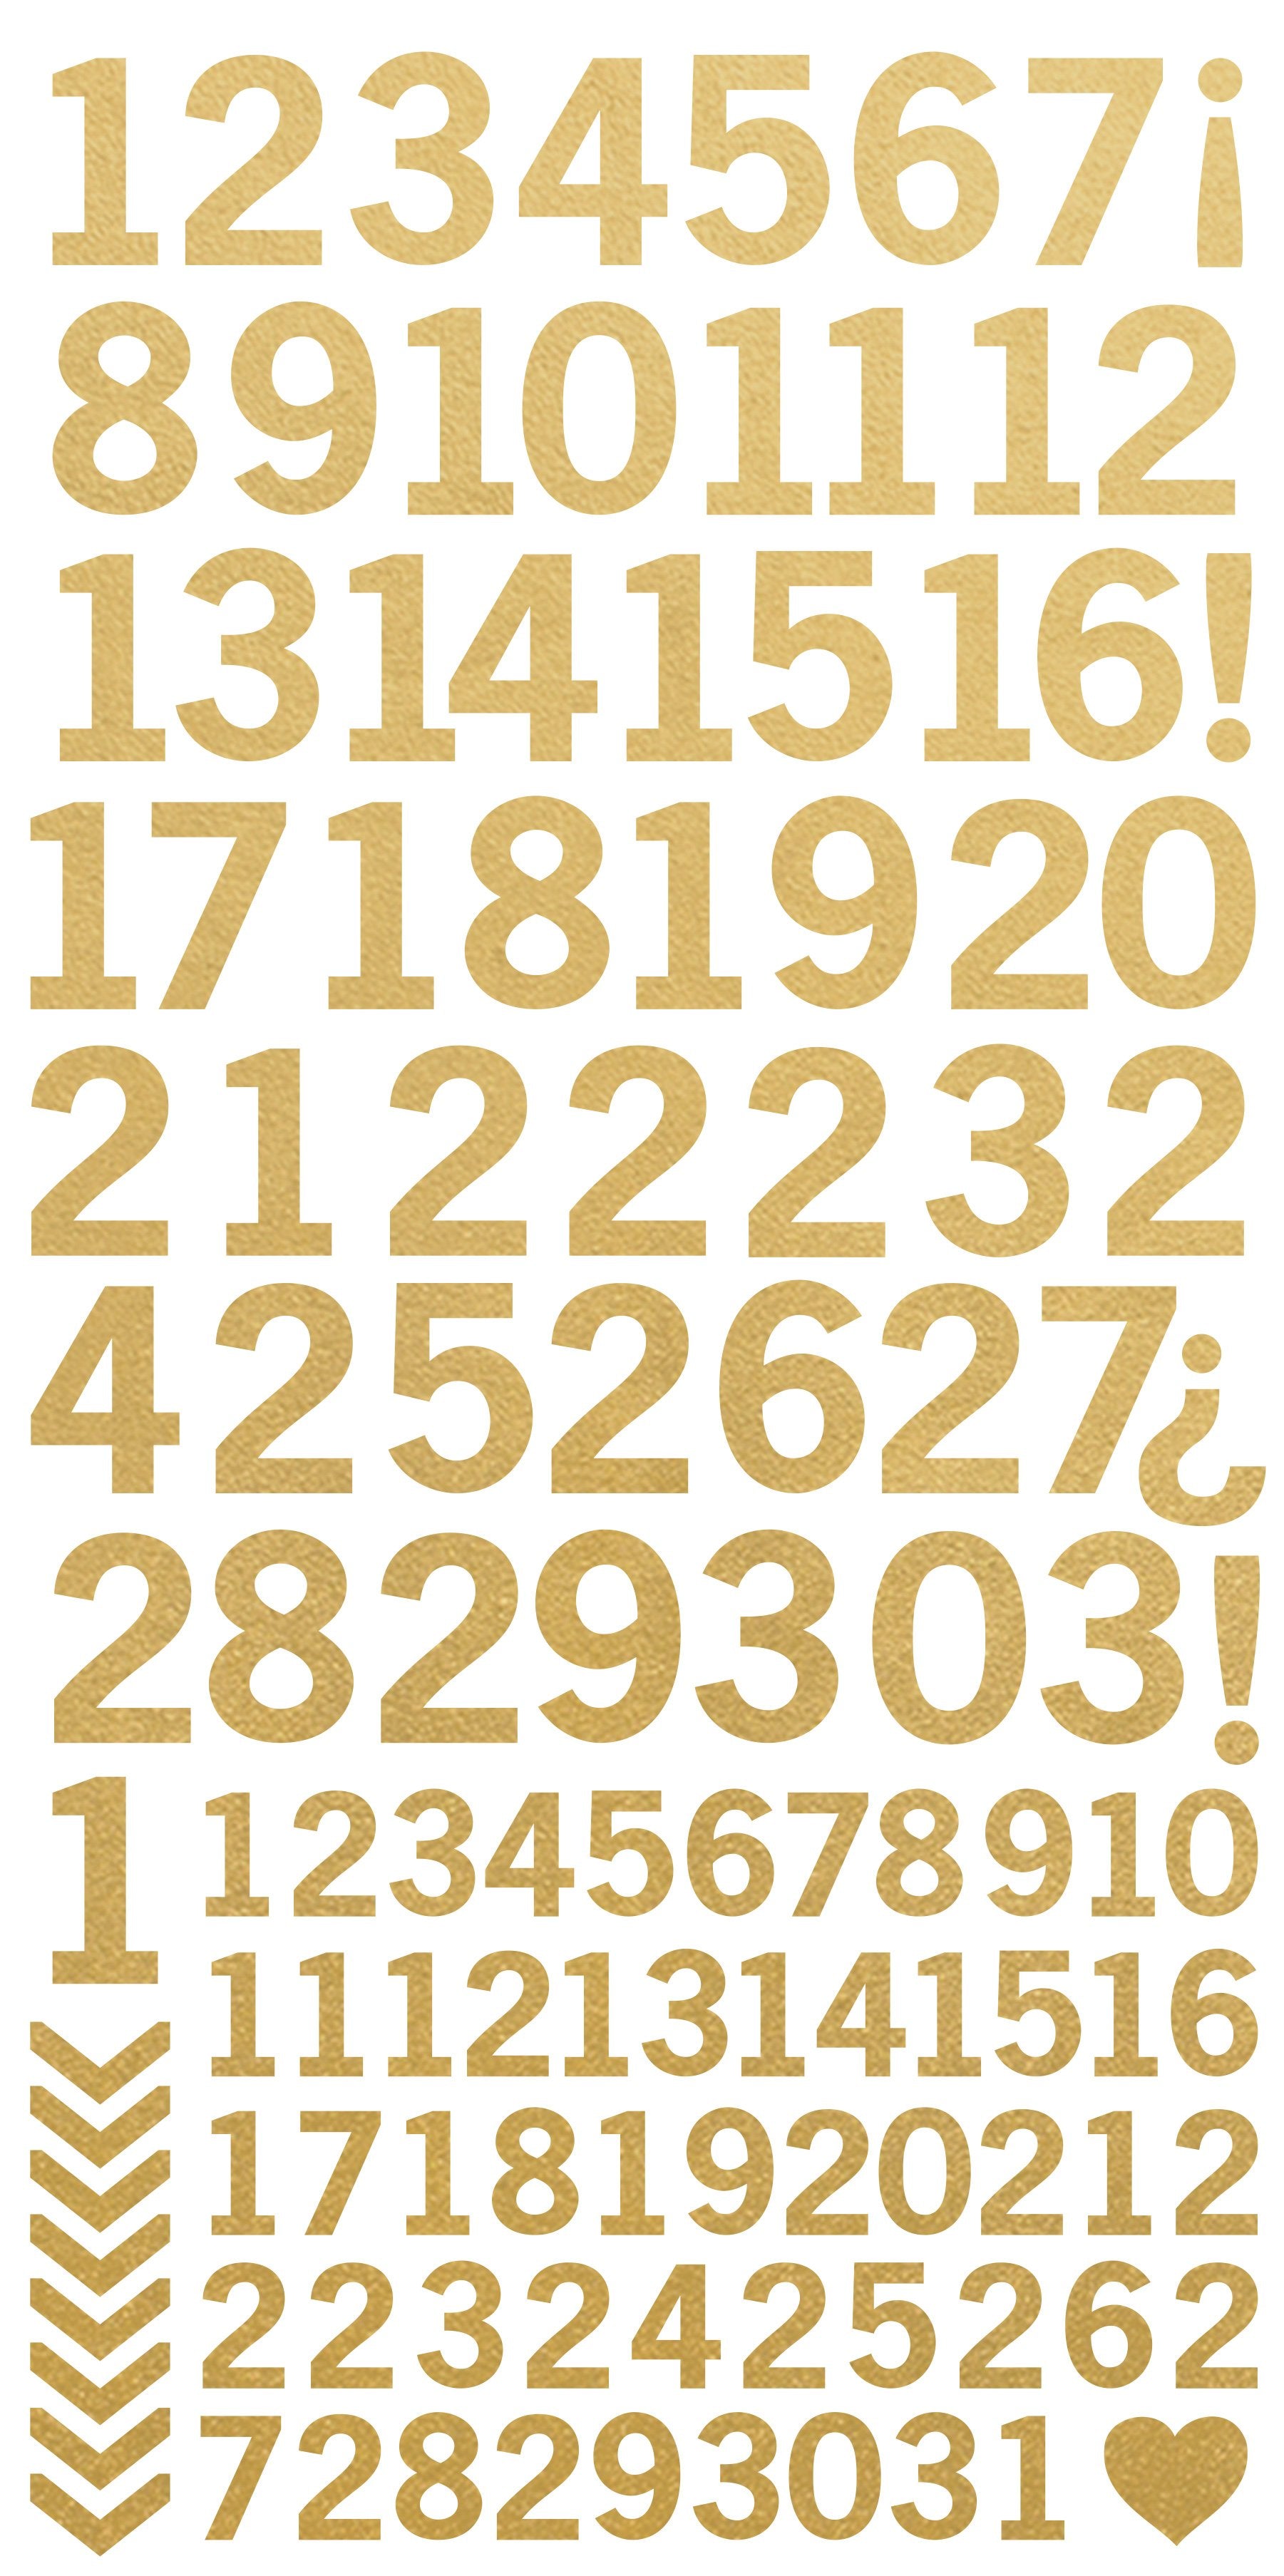 Cursive Gold Number Stickers - 1 Sheet